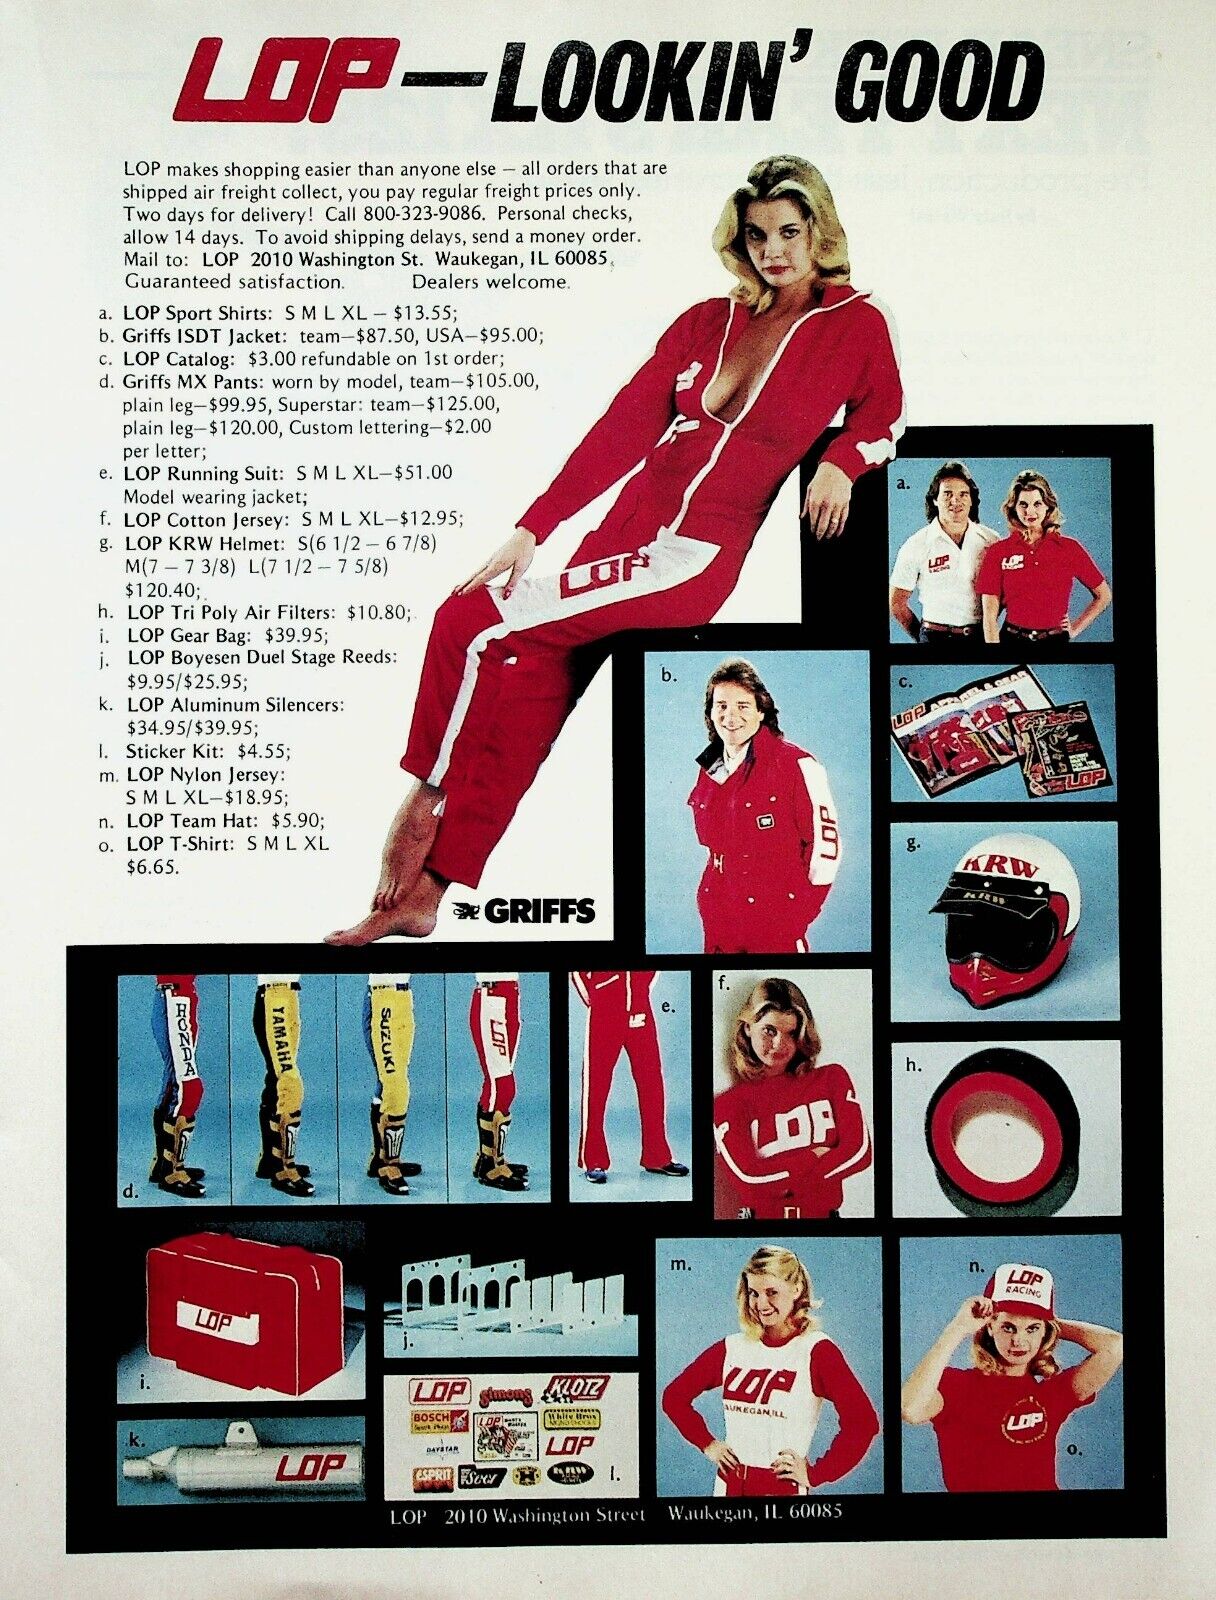 1981 Motocross Clothing LOP Accessories - Vintage Motorcycle Ad